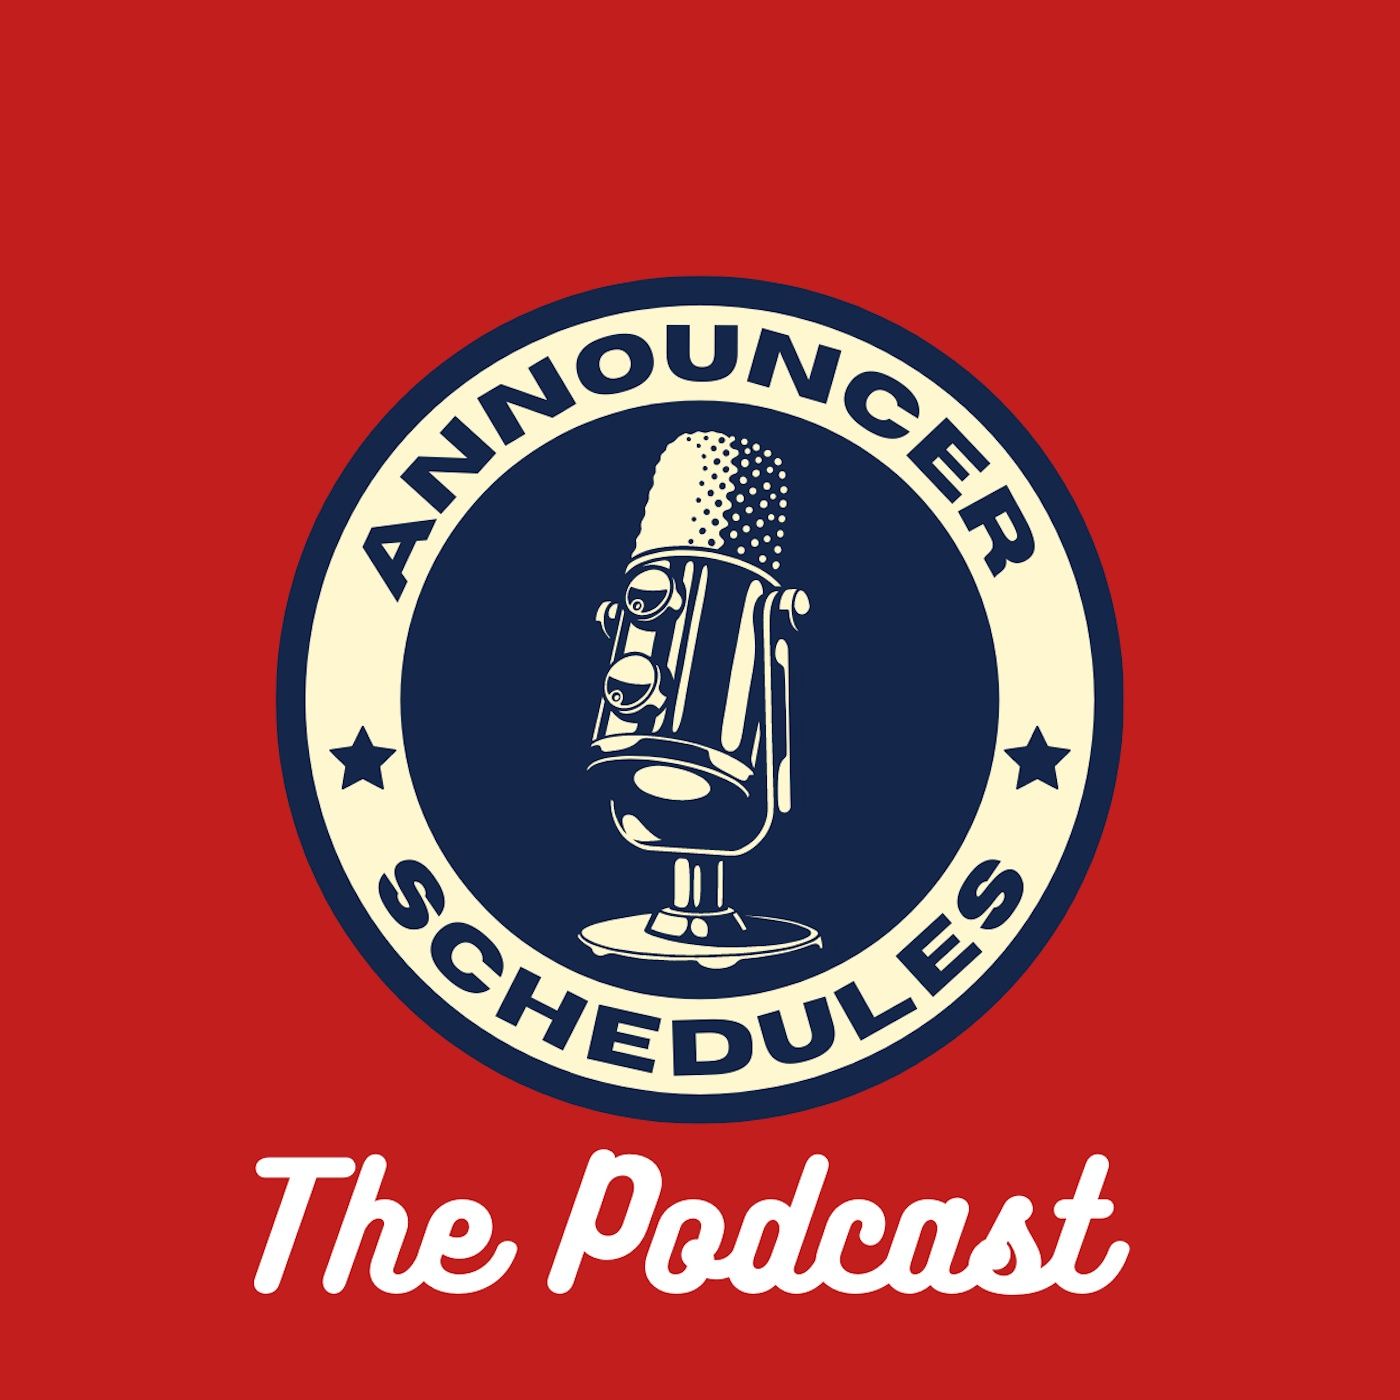 Wayne Randazzo Joins the Show; Westwood One changes, Who's best all-around announcer in all four sports? | Announcer Schedules Podcast